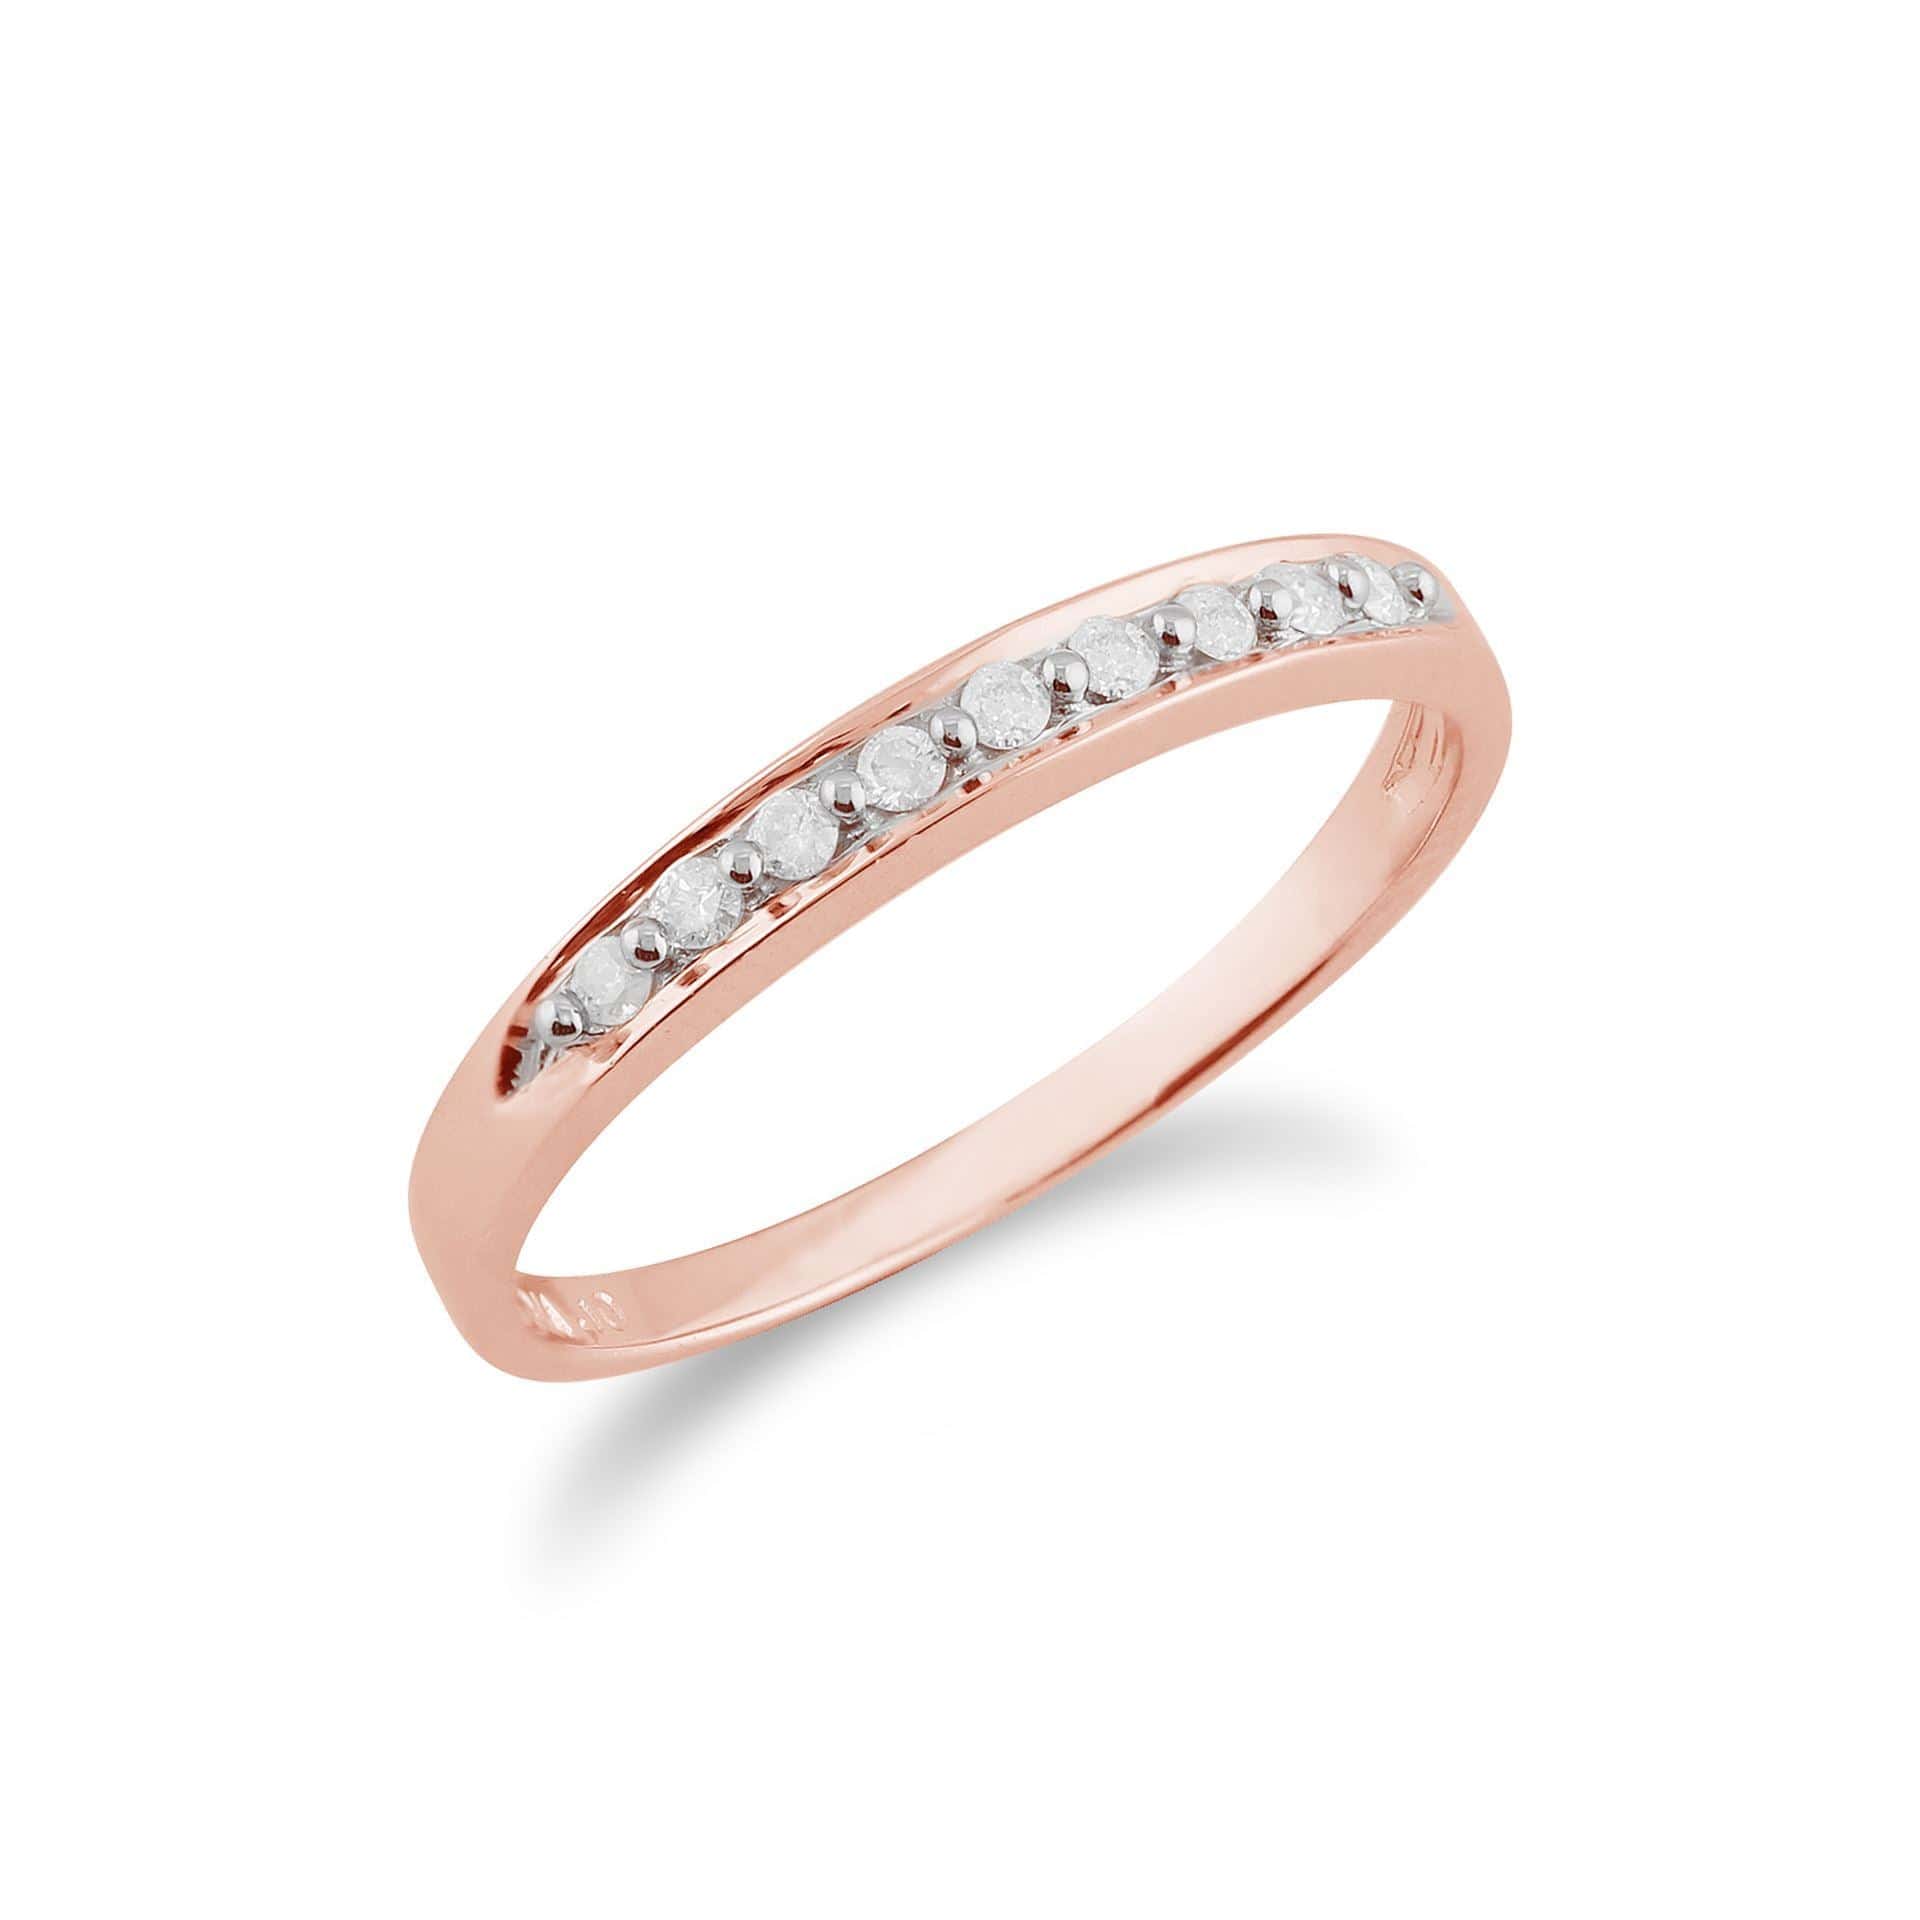 181R4231039 Classic Round Diamond Eternity Ring in 9ct Rose Gold 4